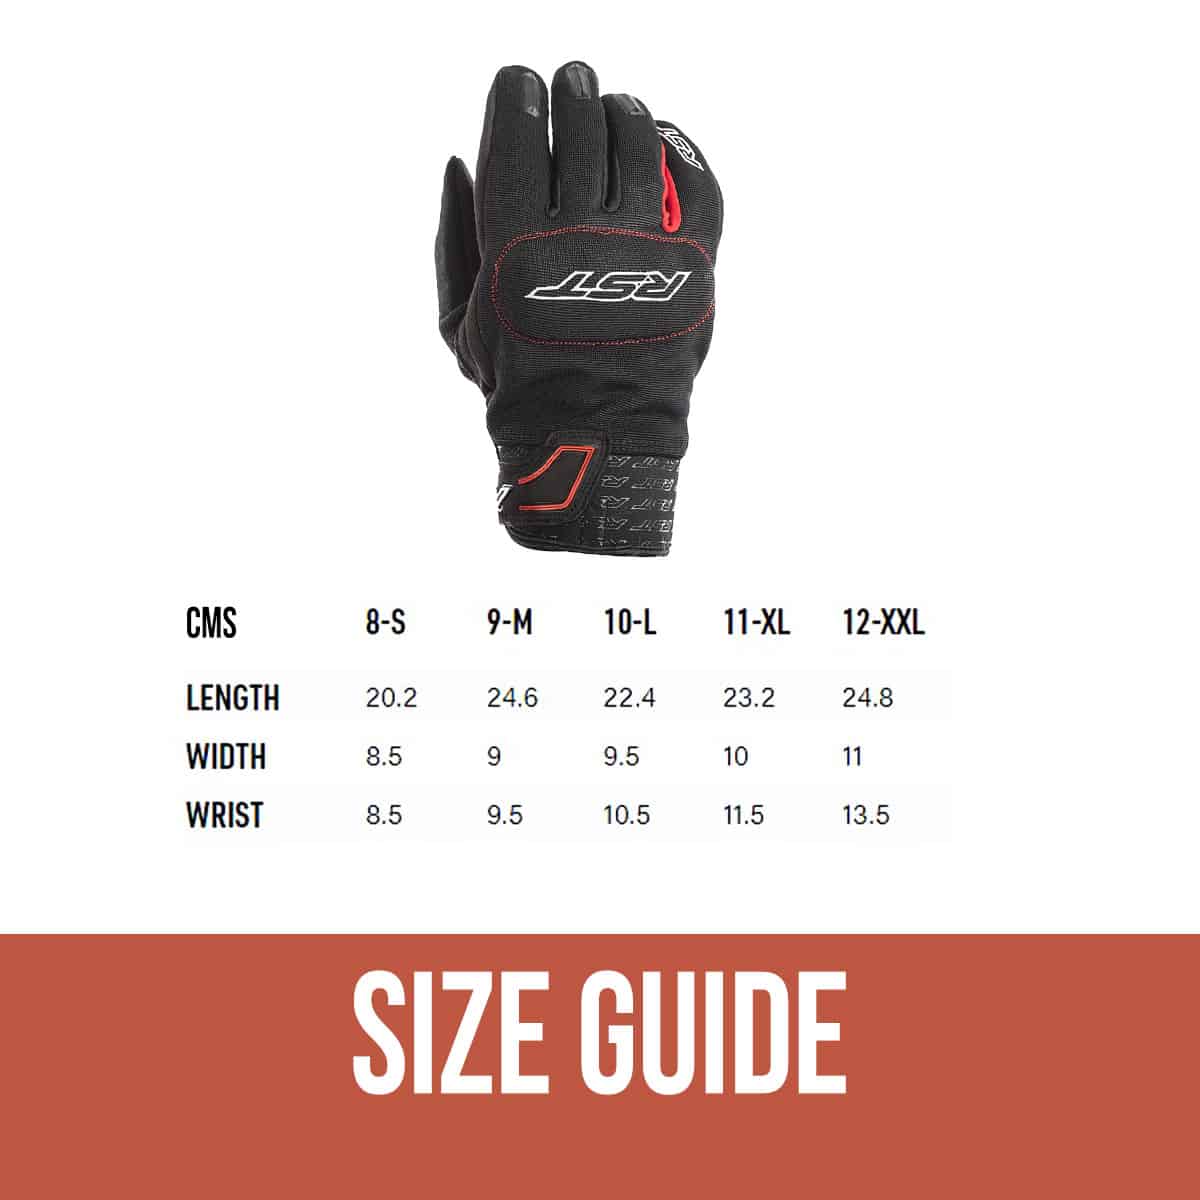 RST 2100 Rider CE-Certified Motorcycle Gloves: Light-weight Summer touring gloves - Size Guide